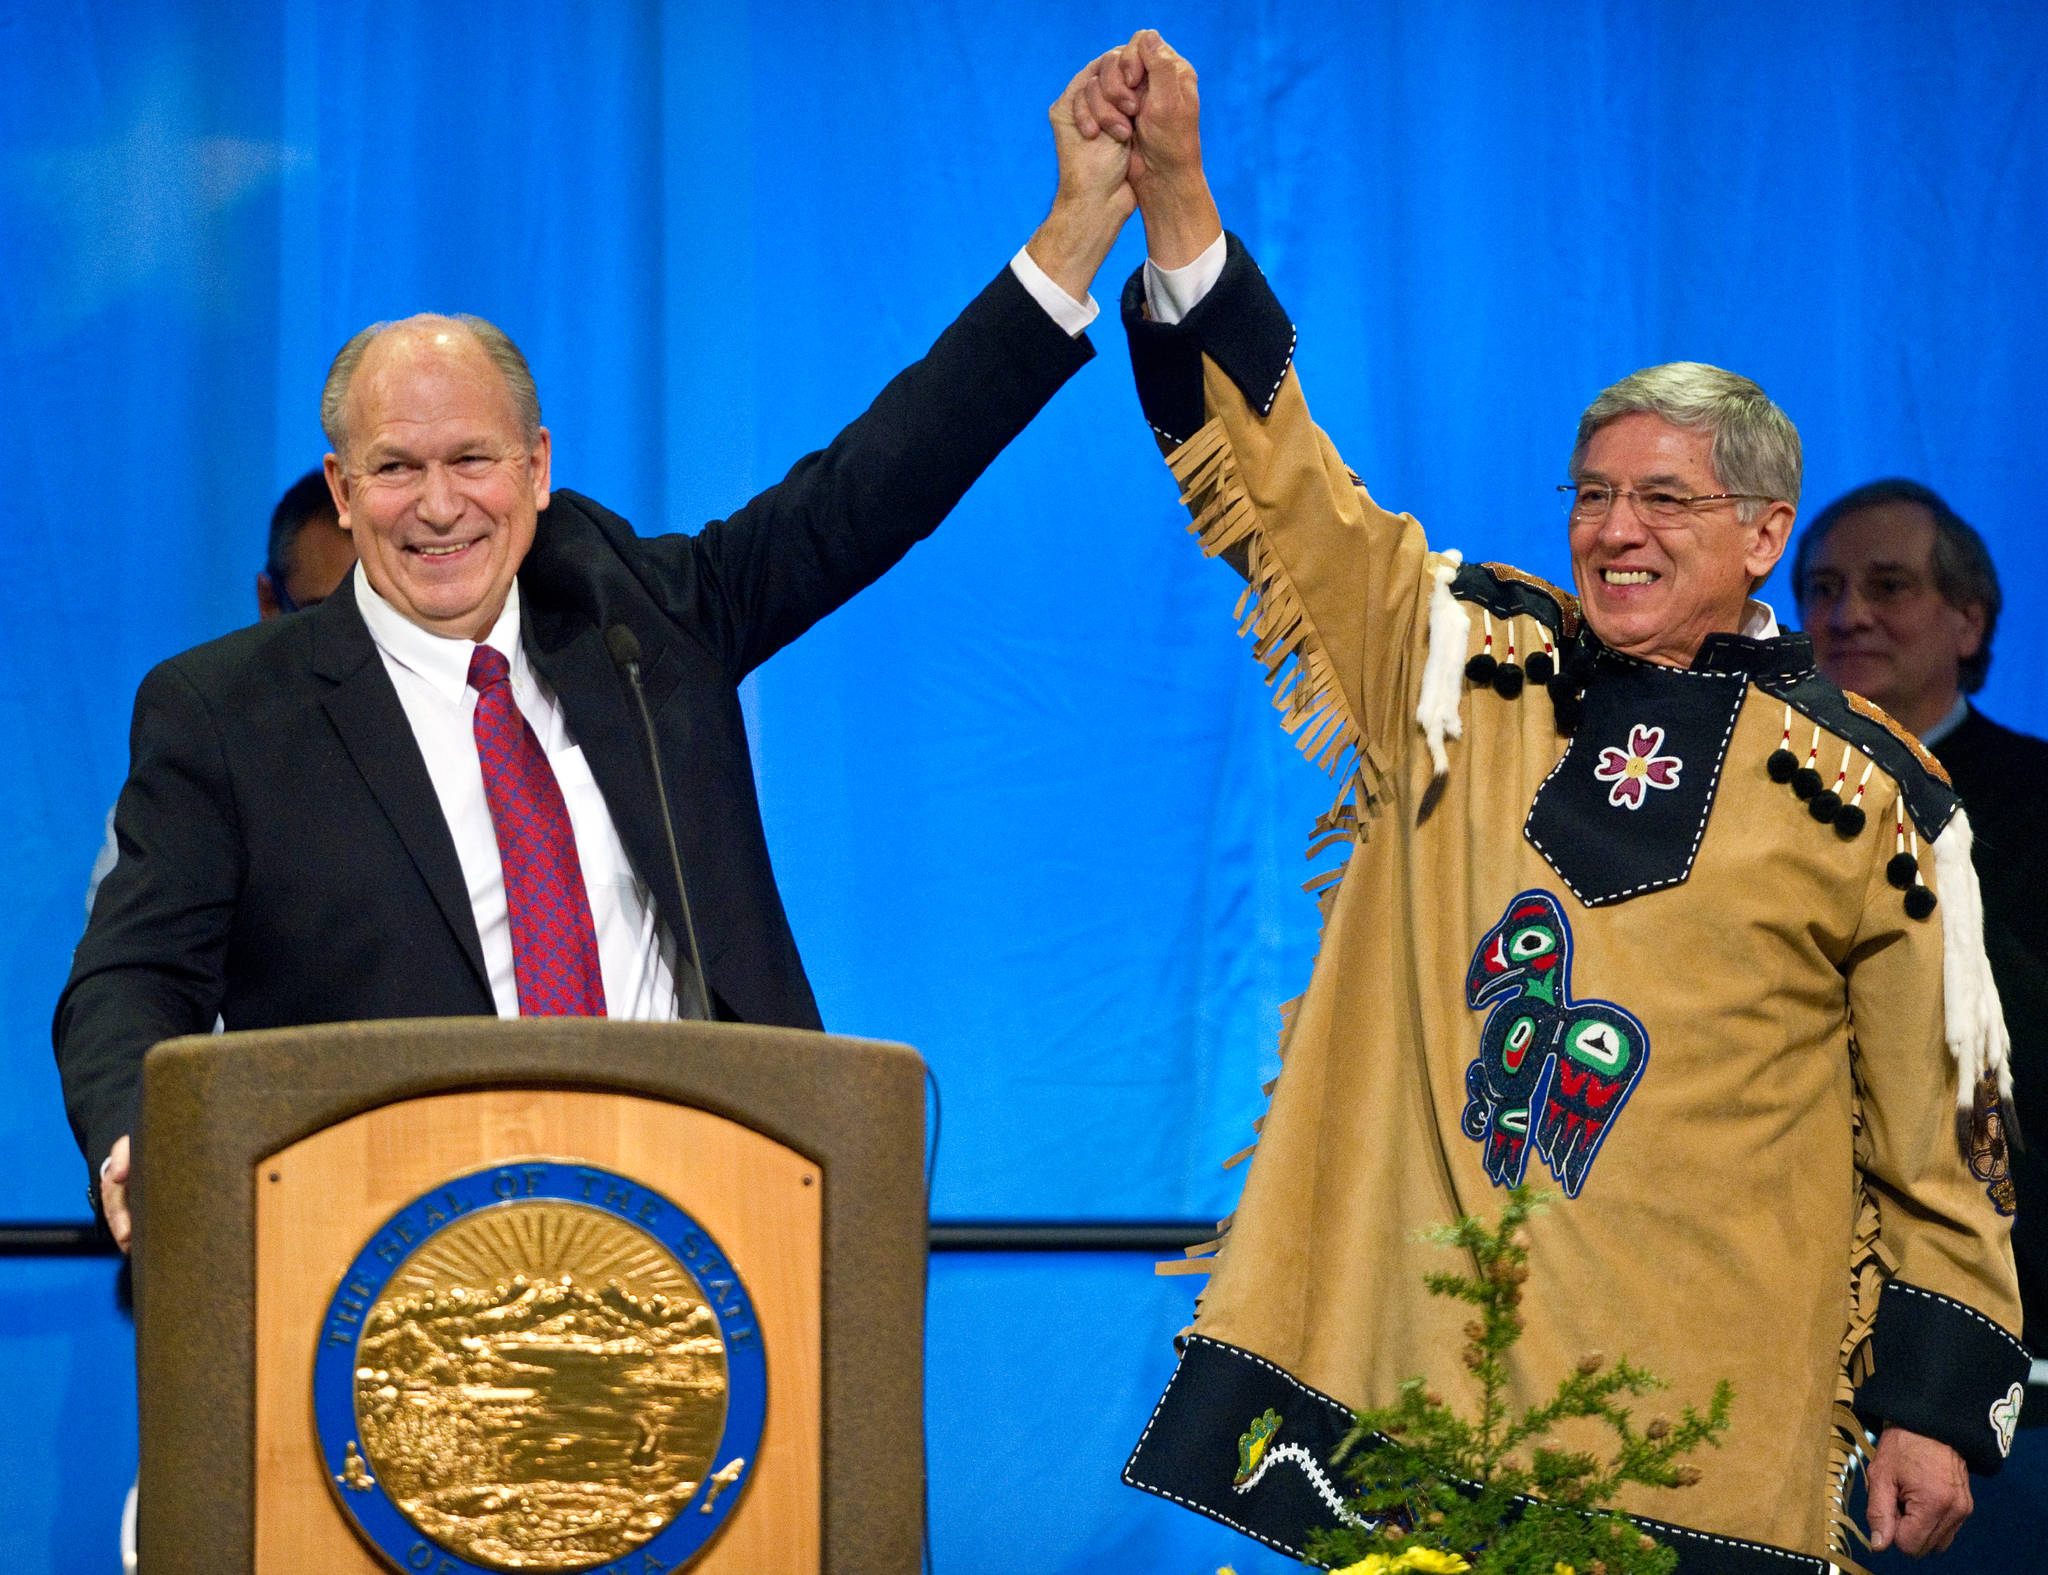 In this Dec. 1, 2014 photo, Gov. Bill Walker, left, and Lt. Gov. Byron Mallott join hands on stage at the end of inauguration ceremonies at Centennial Hall. (Michael Penn | Juneau Empire File)